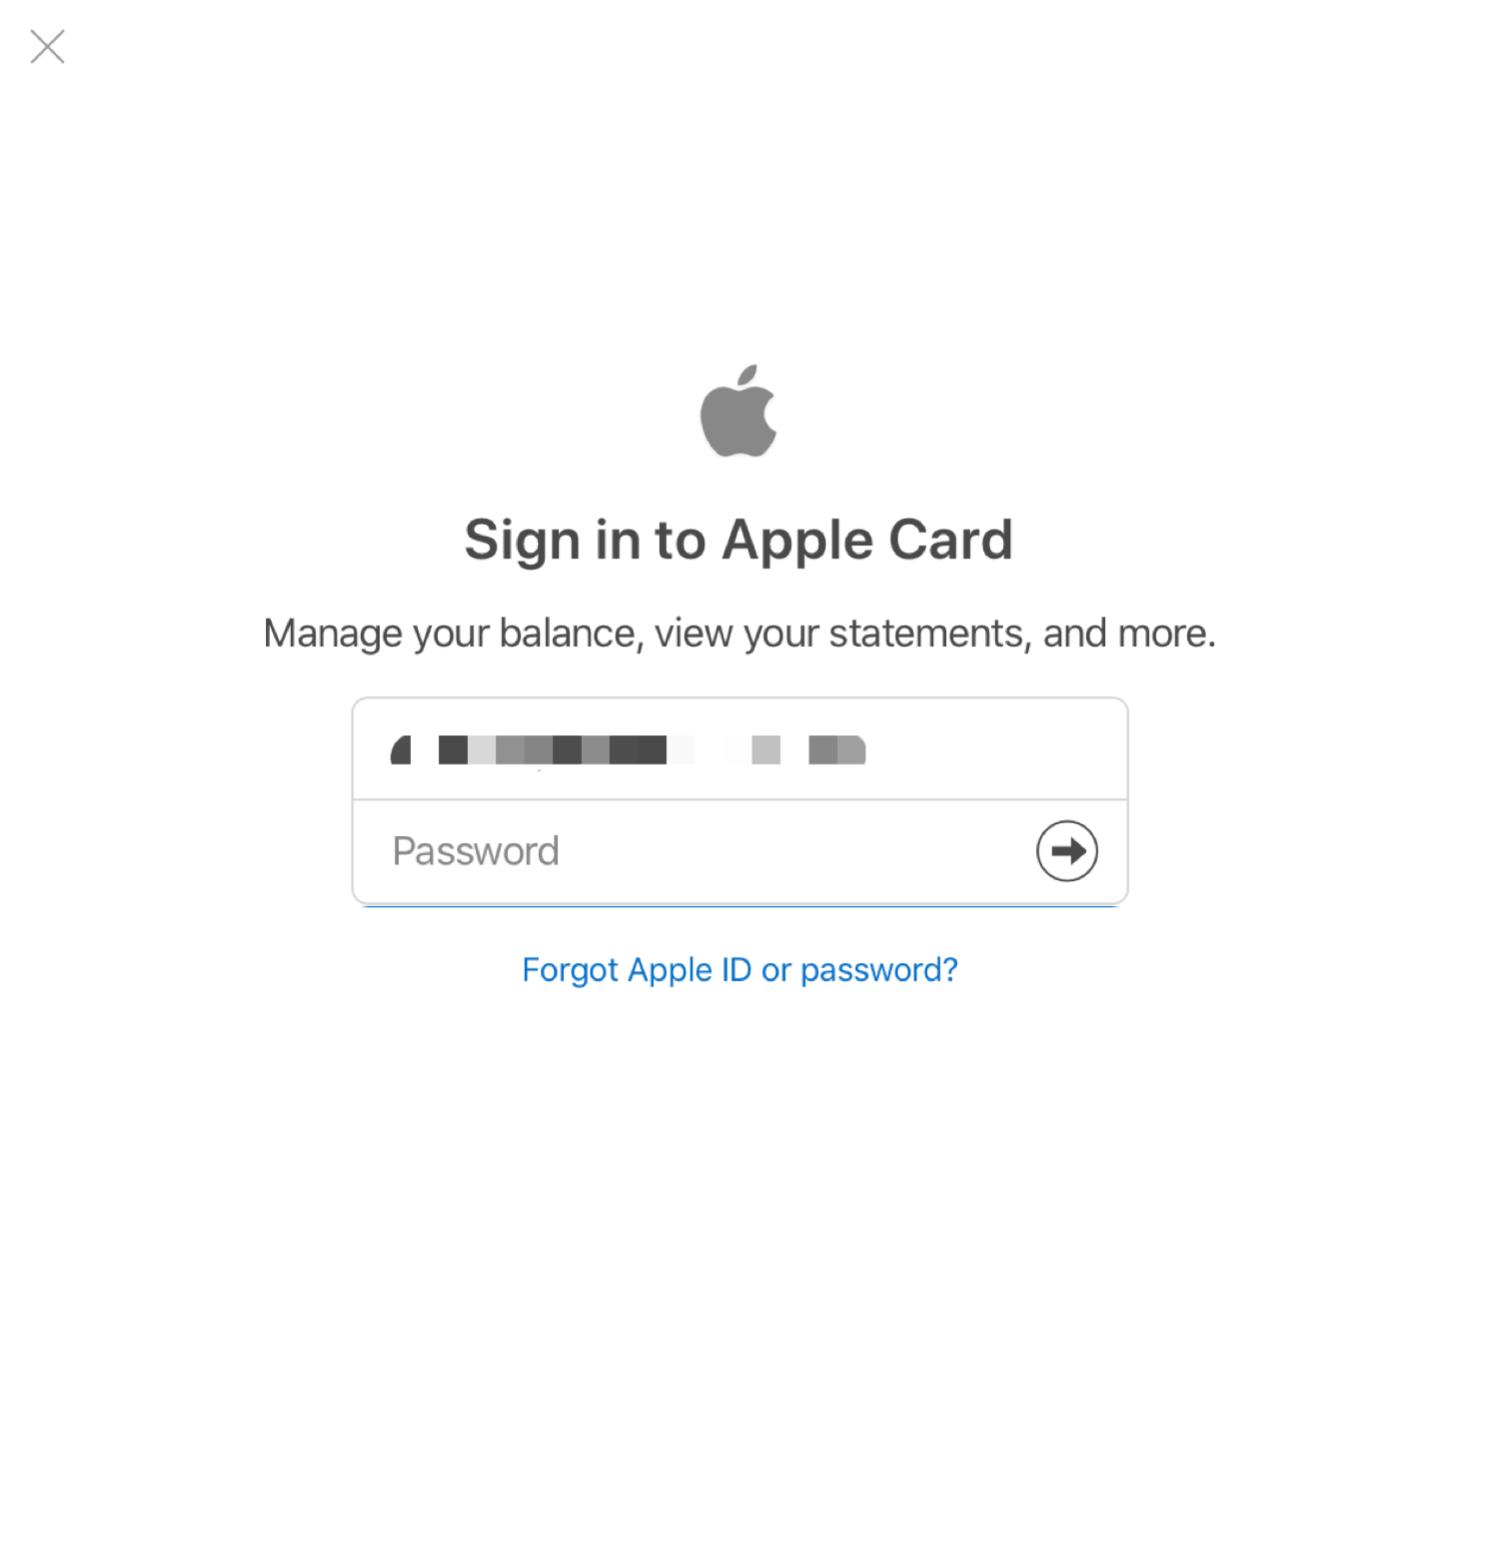 Access your Apple Card account online by showing steps: Log in to your Apple ID associated with the Apple Card